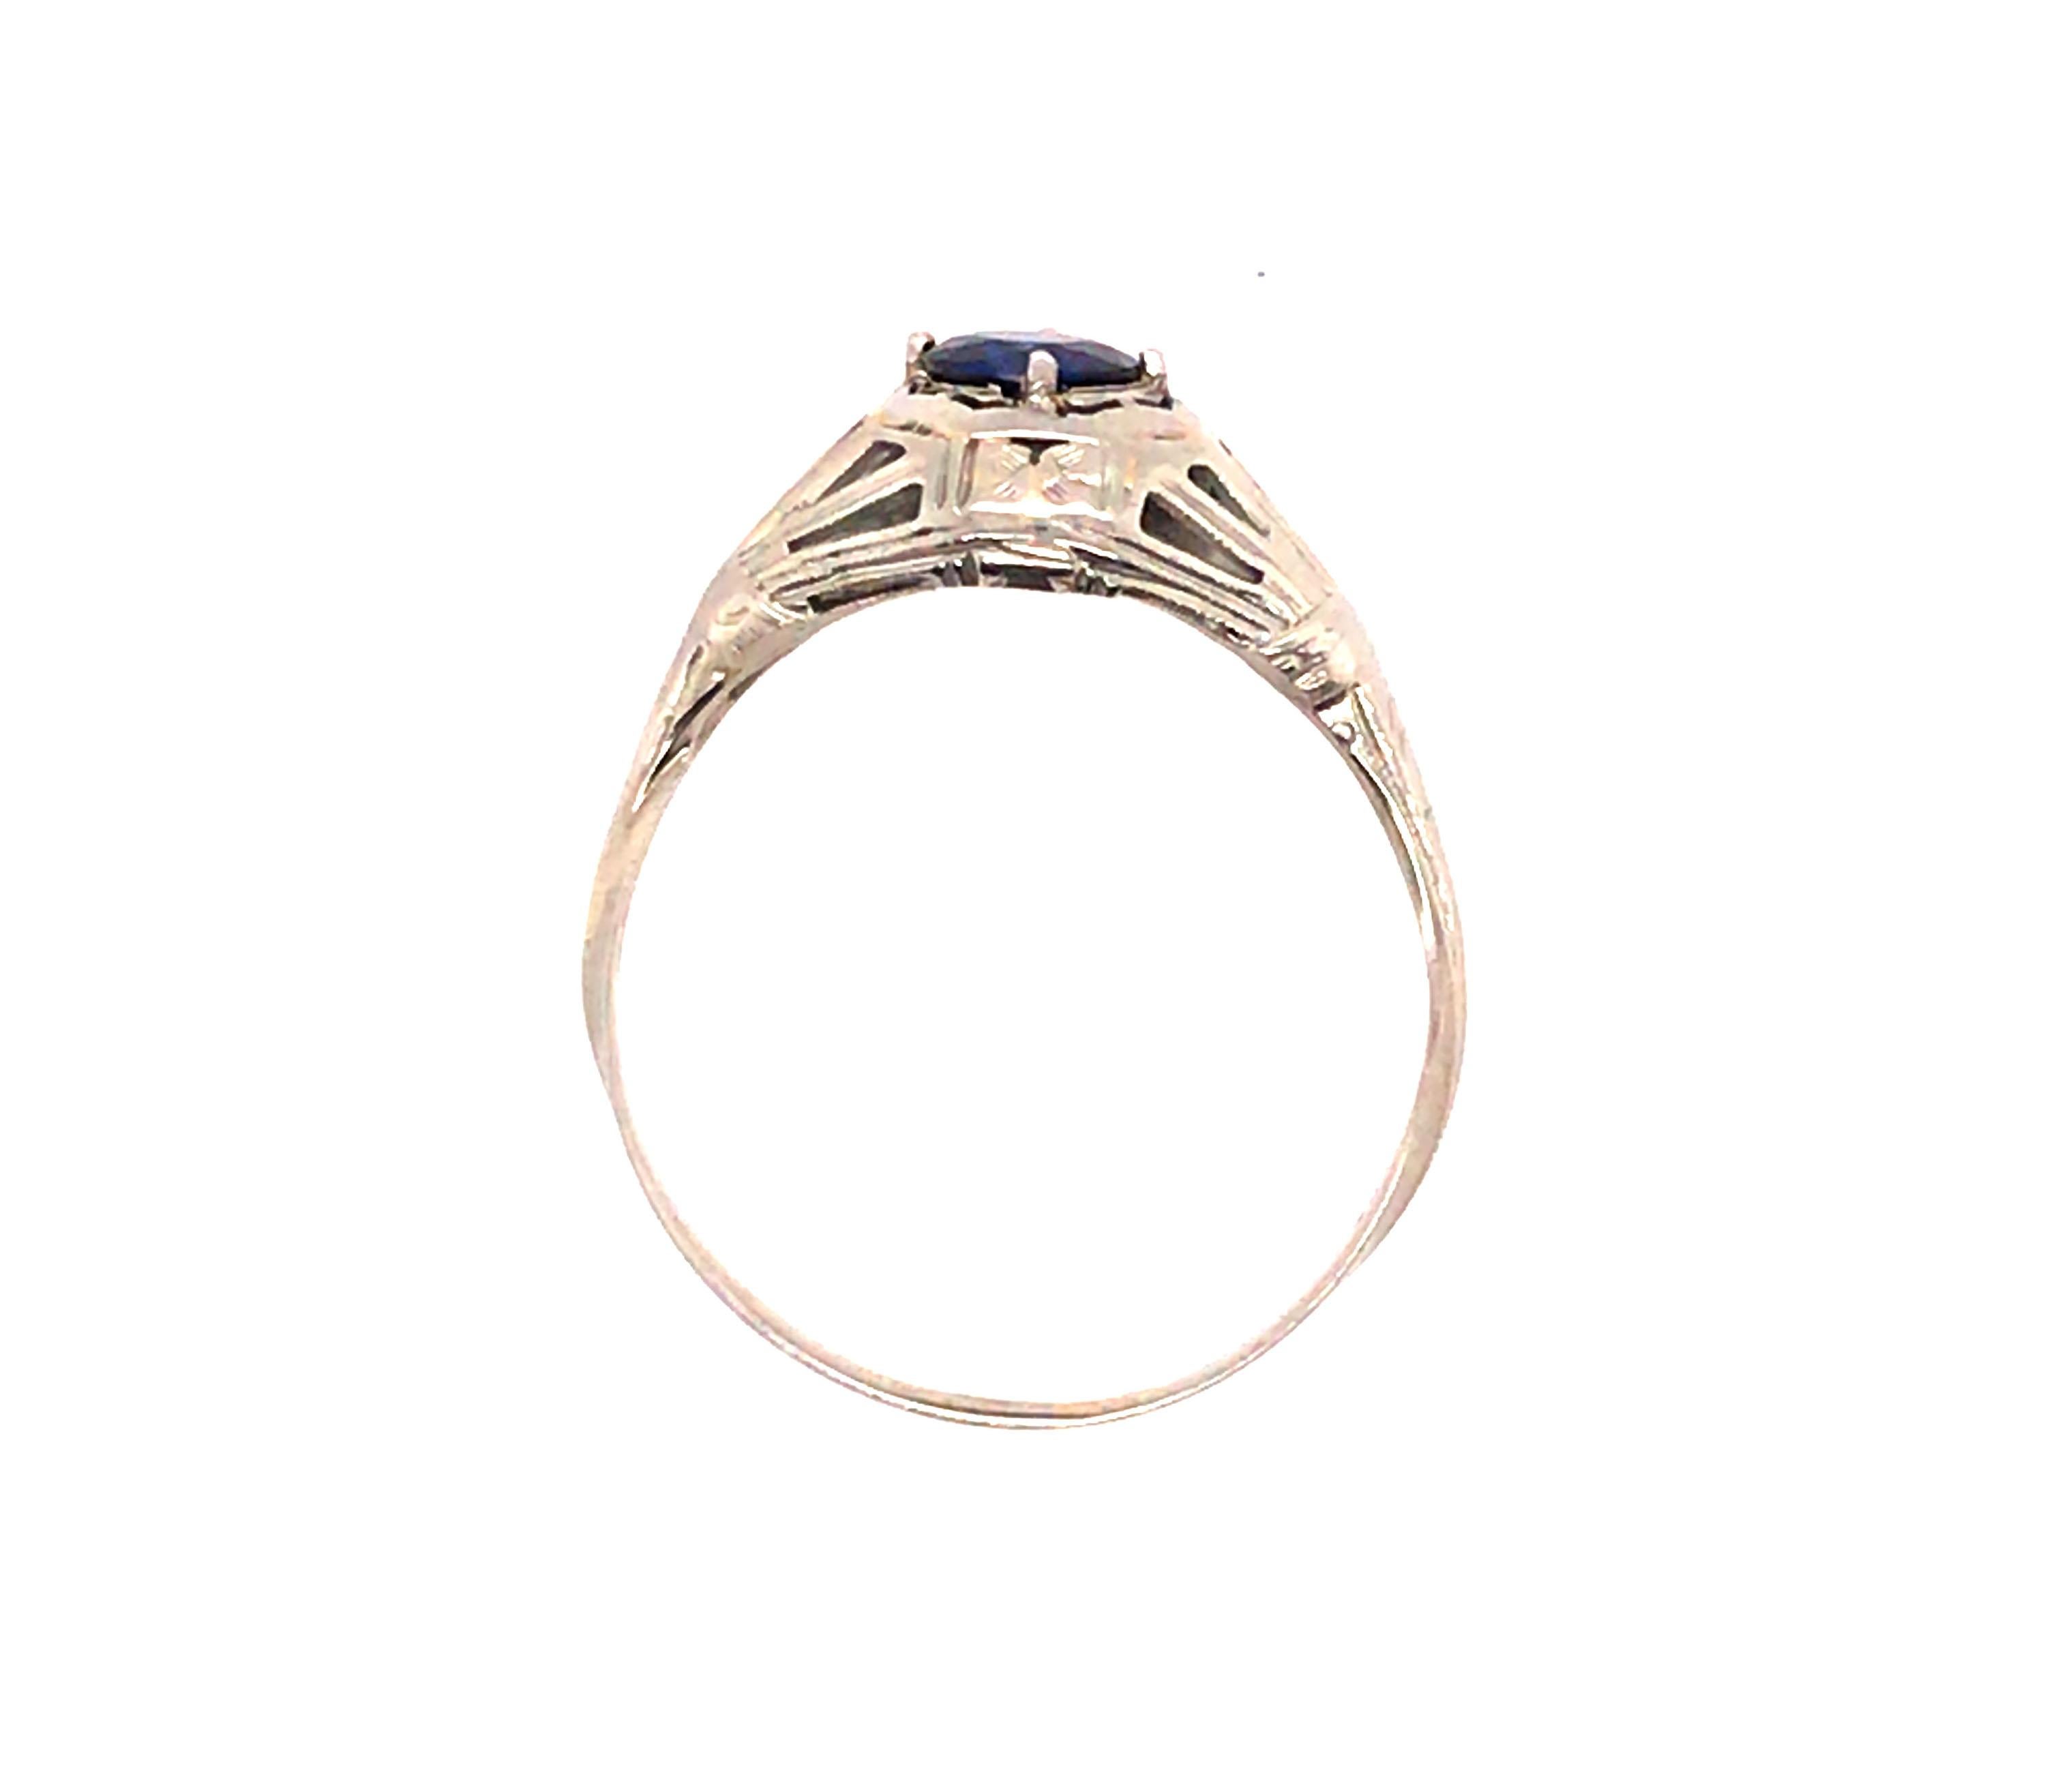 Genuine Original Art Deco Antique from 1920's Vintage Sapphire Ring .50ct Round Solitaire 18K White Gold 


Featuring a Gorgeous .50ct Genuine Natural Royal Blue Round Sapphire 

Perfect Alternative Engagement Ring

Hand Engraved All Original 

100%